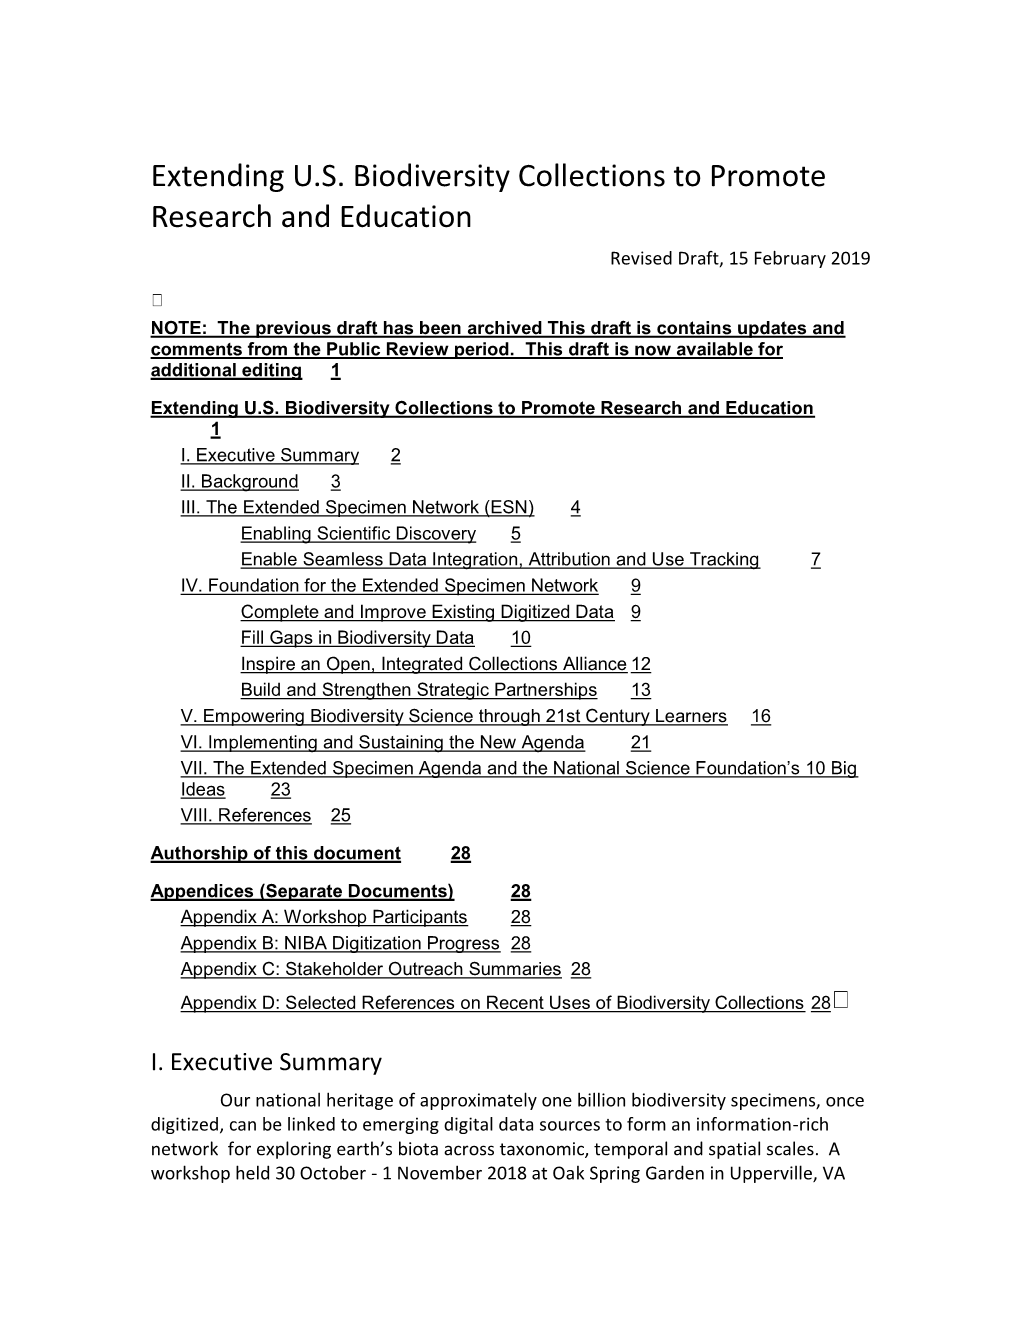 Extending U.S. Biodiversity Collections to Promote Research and Education Revised Draft, 15 February 2019